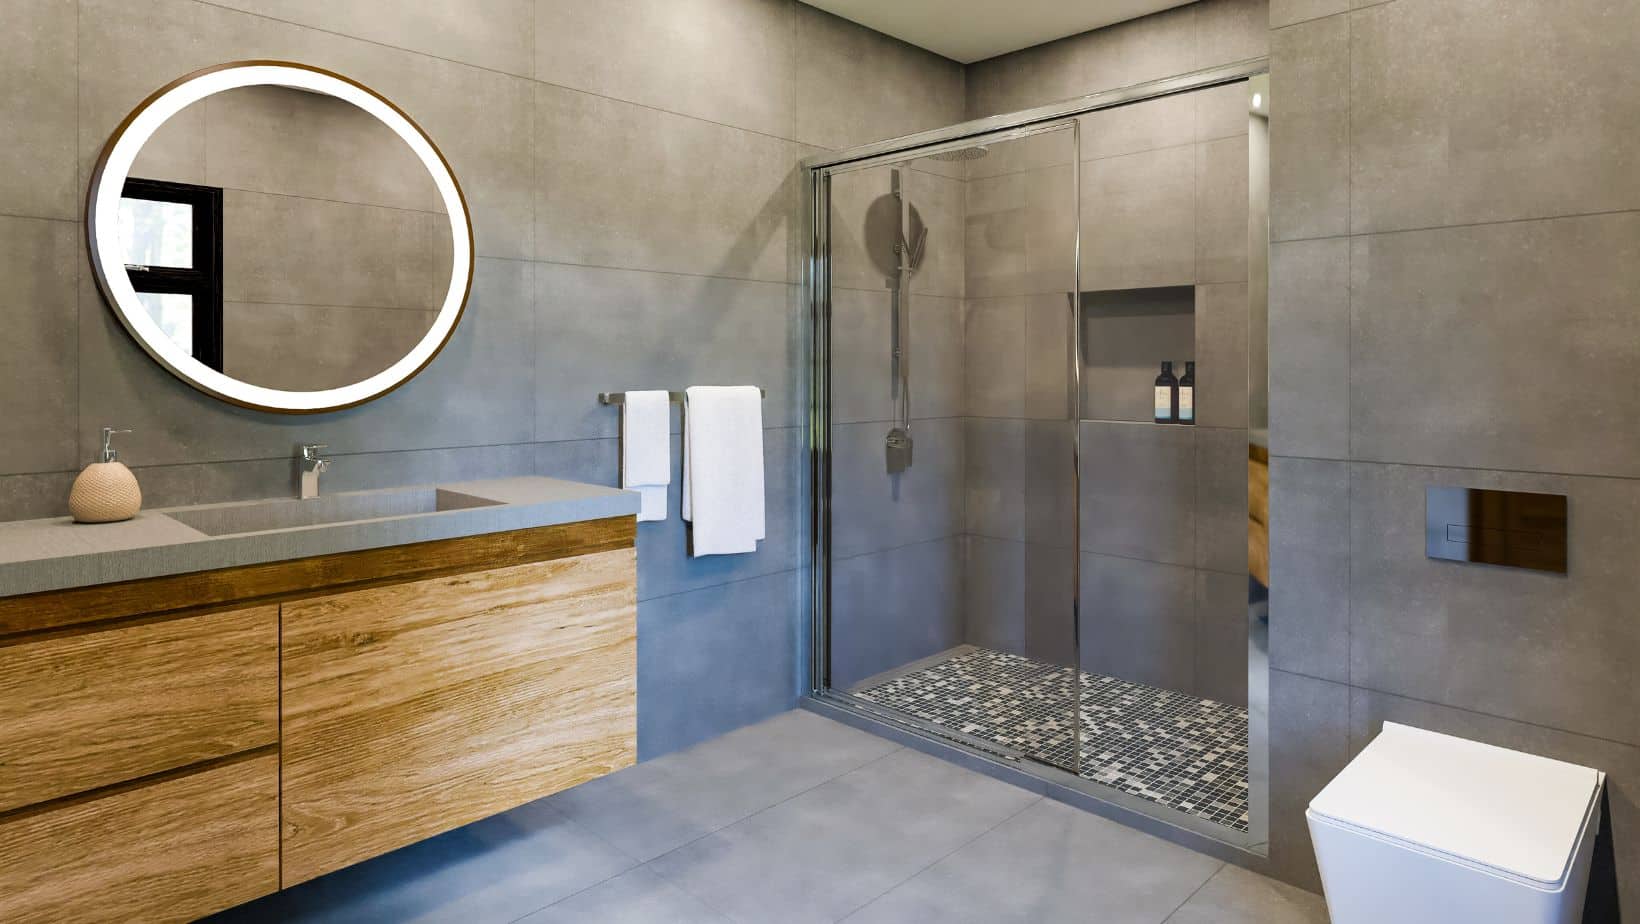 Grey modern bathroom with wood floating bathroom cabinets, grey countertop, toilet, and walk-in shower